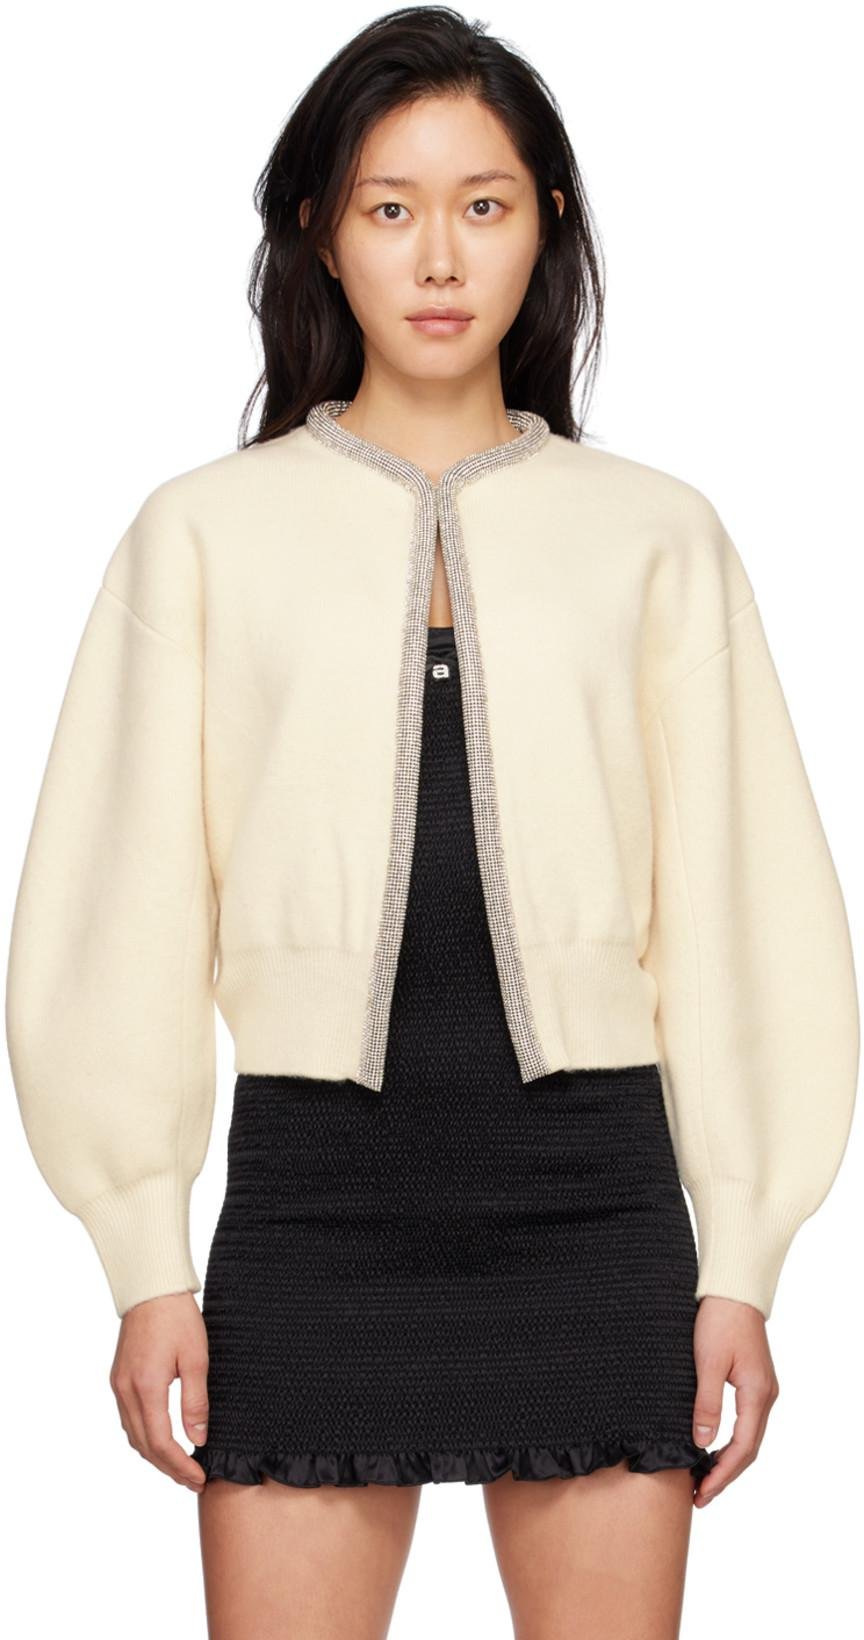 Off-White Crystal Trim Cardigan by ALEXANDER WANG